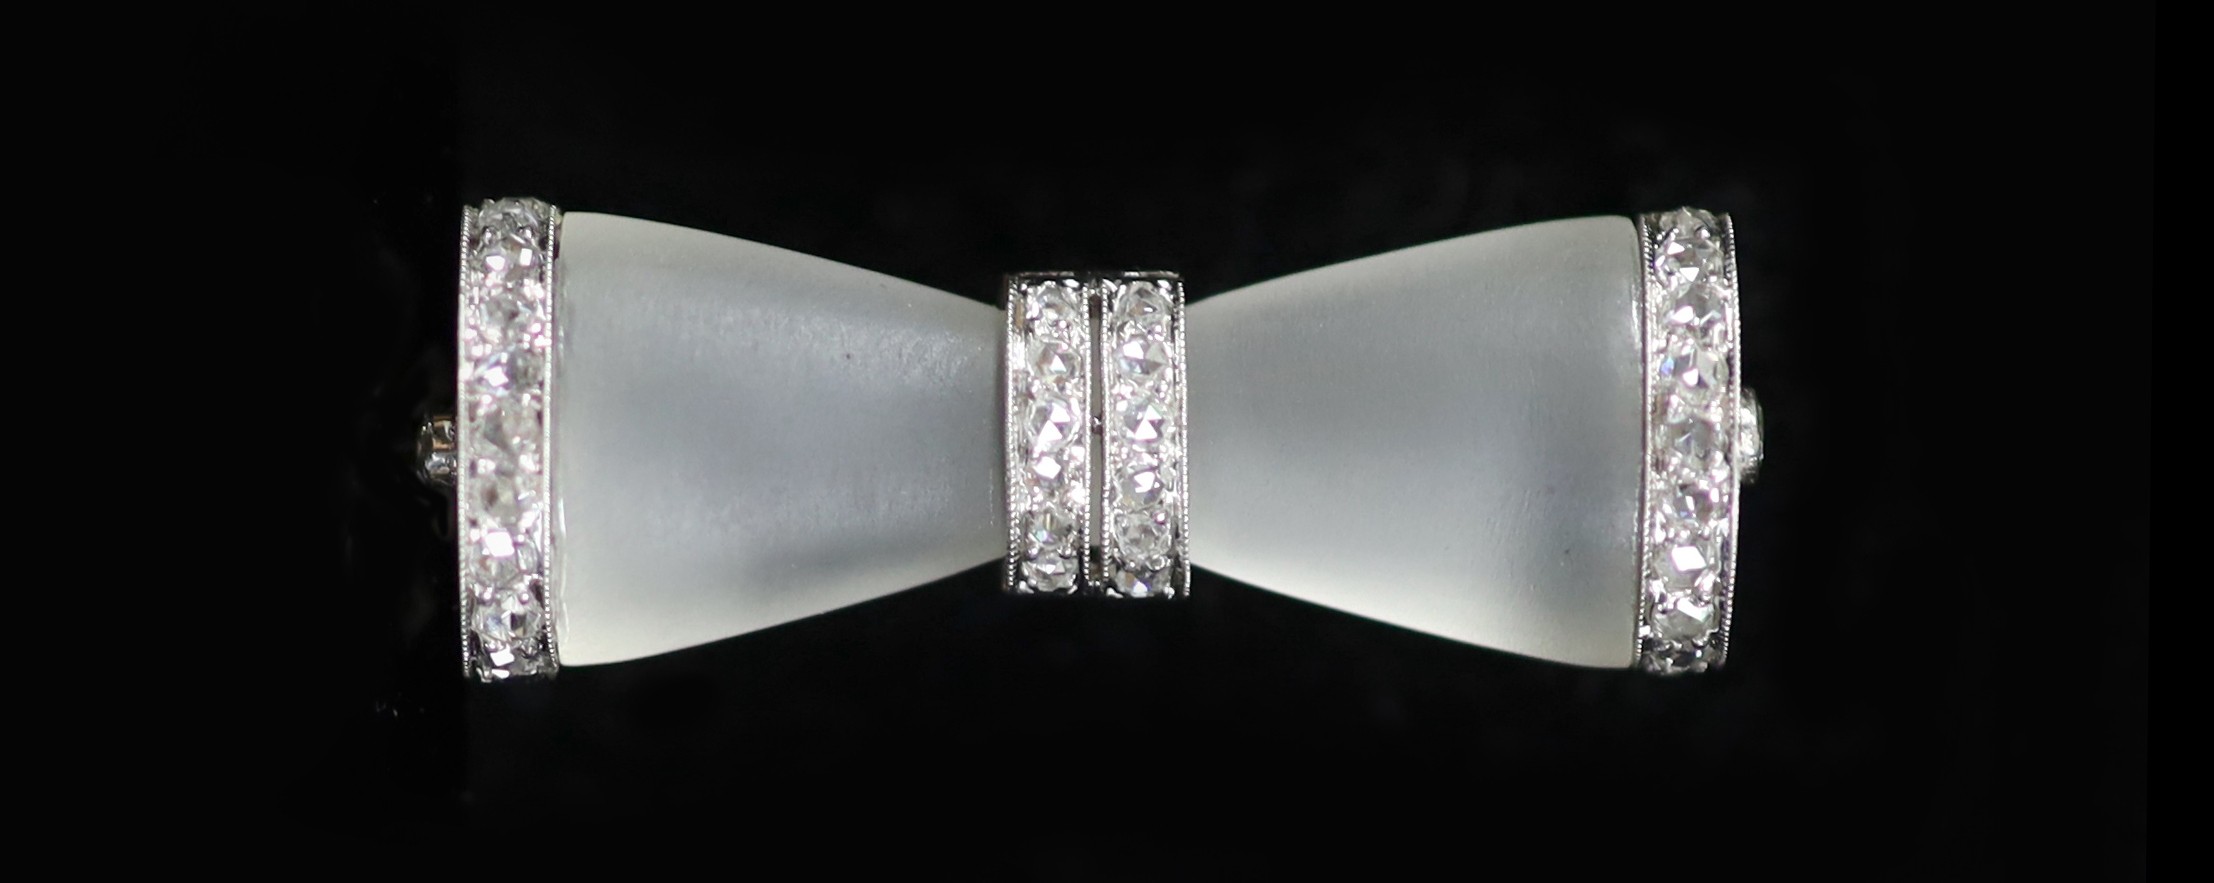 A 1930's/1940's engraved white gold, frosted glass and rose cut diamond set 'bow tie' brooch